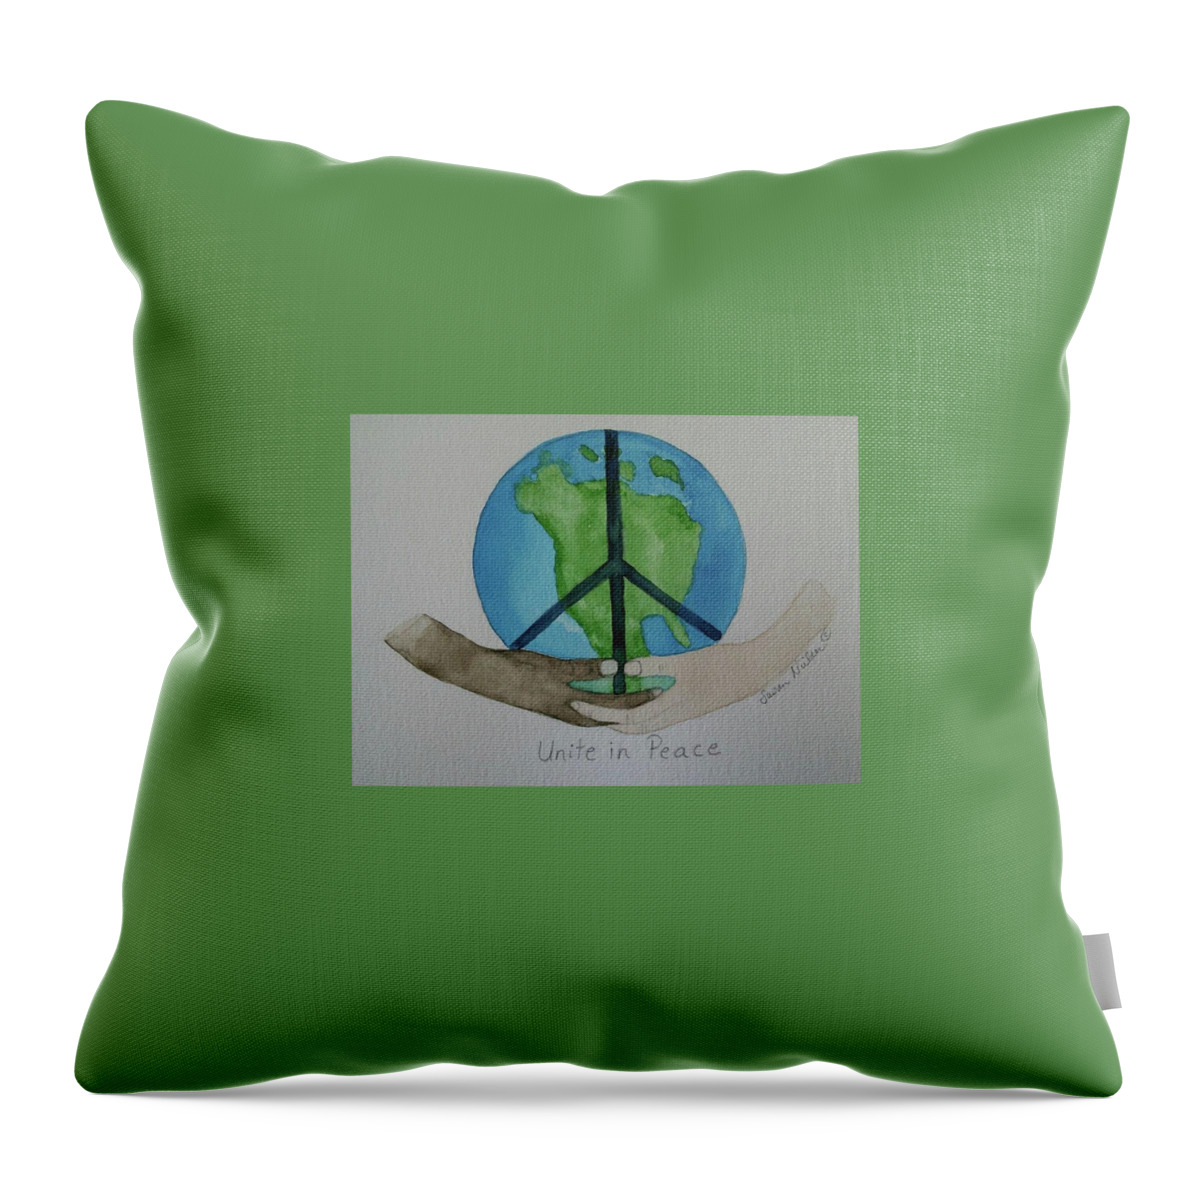 Peace Throw Pillow featuring the painting Unite in Peace by Susan Nielsen